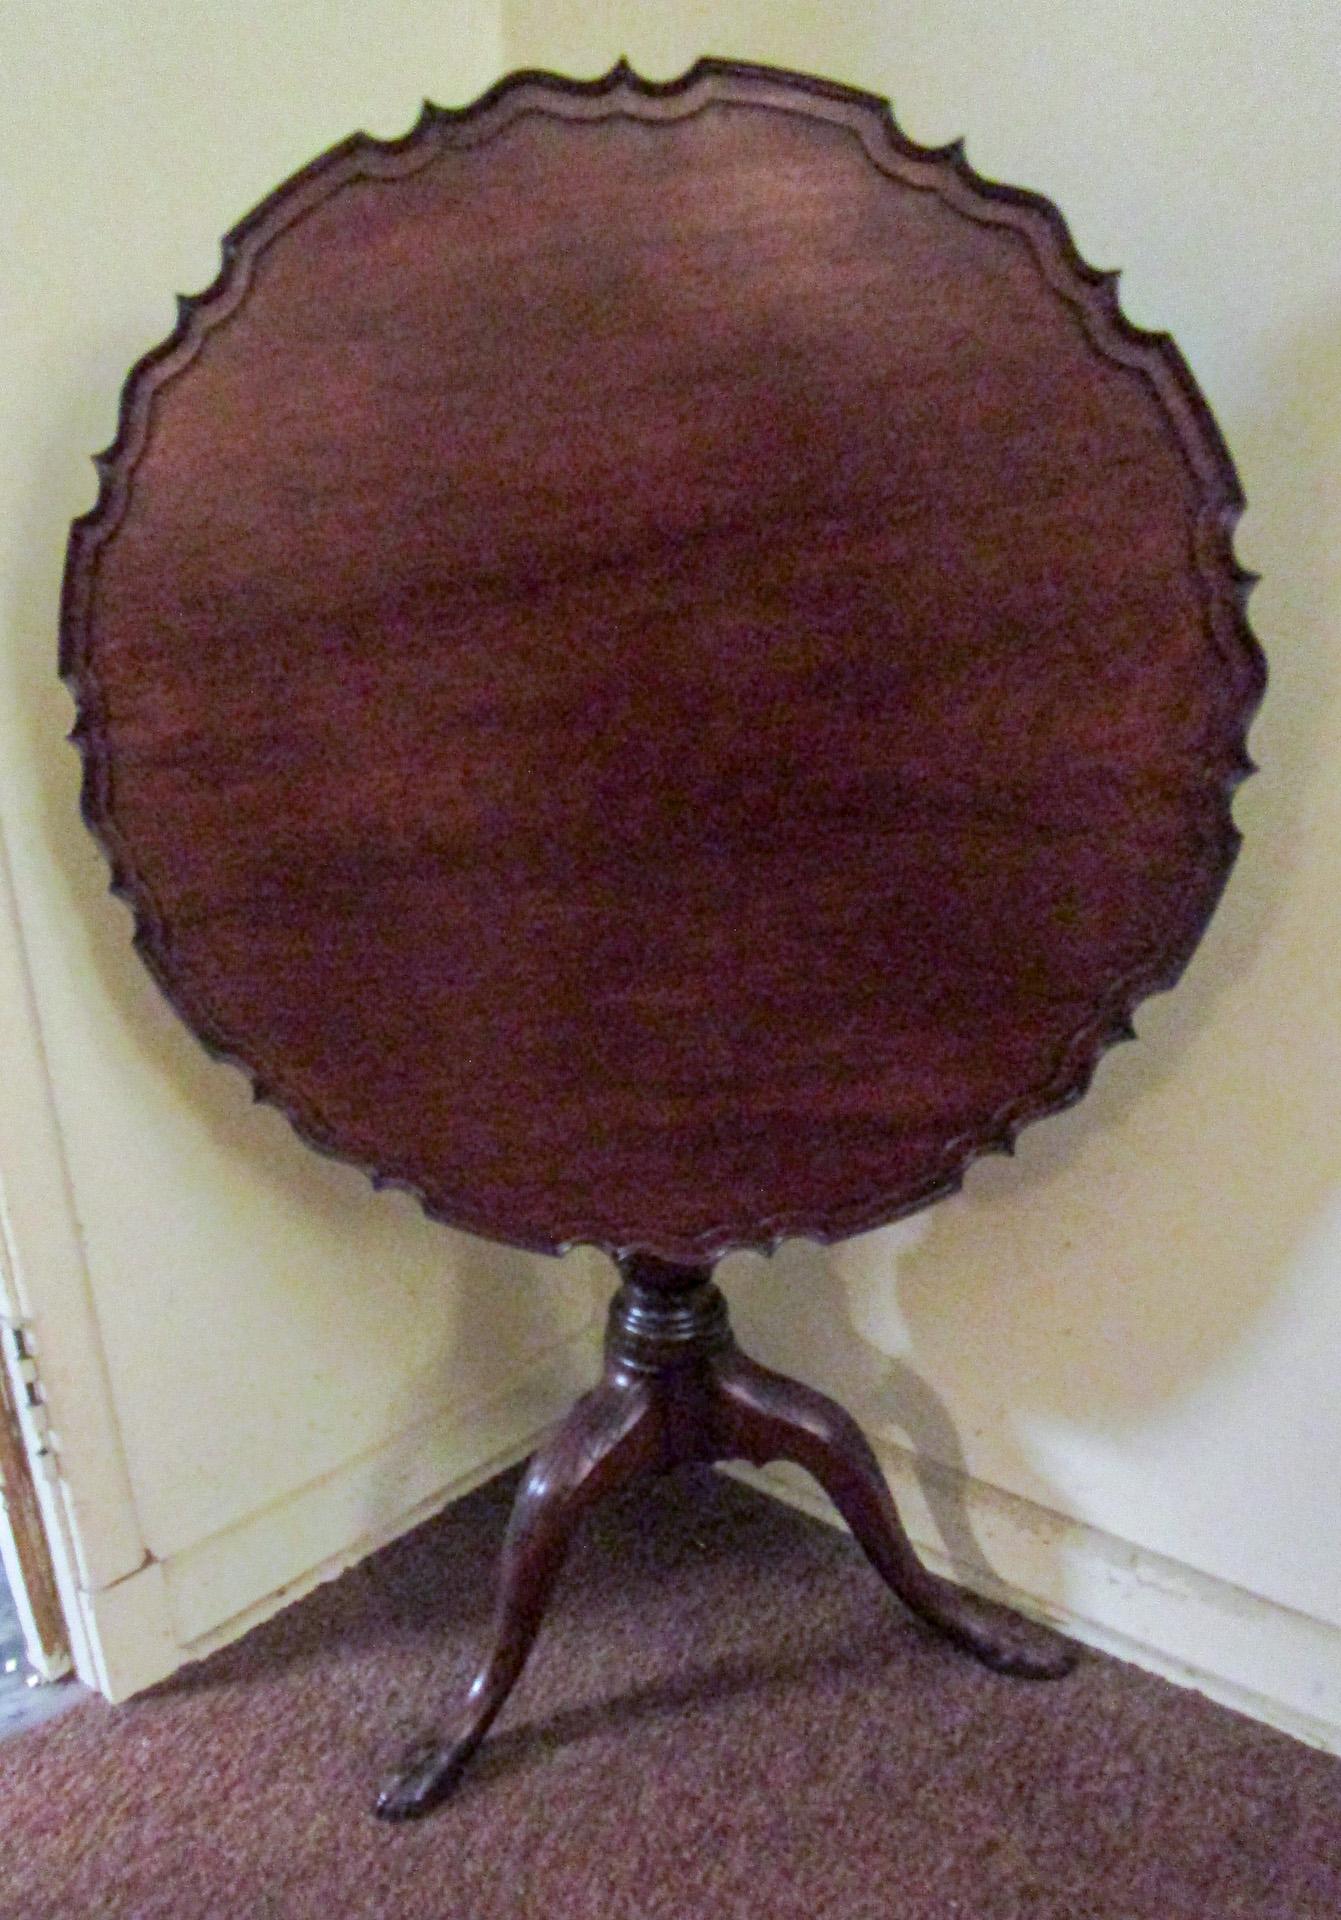 This outstanding large size period Chippendale English mahogany tilt-top table features a hand carved piecrust top on a birdcage and leaf carving on the tripod legs. This sturdy table could be used as an extra tea table tucked away tilted up or as a